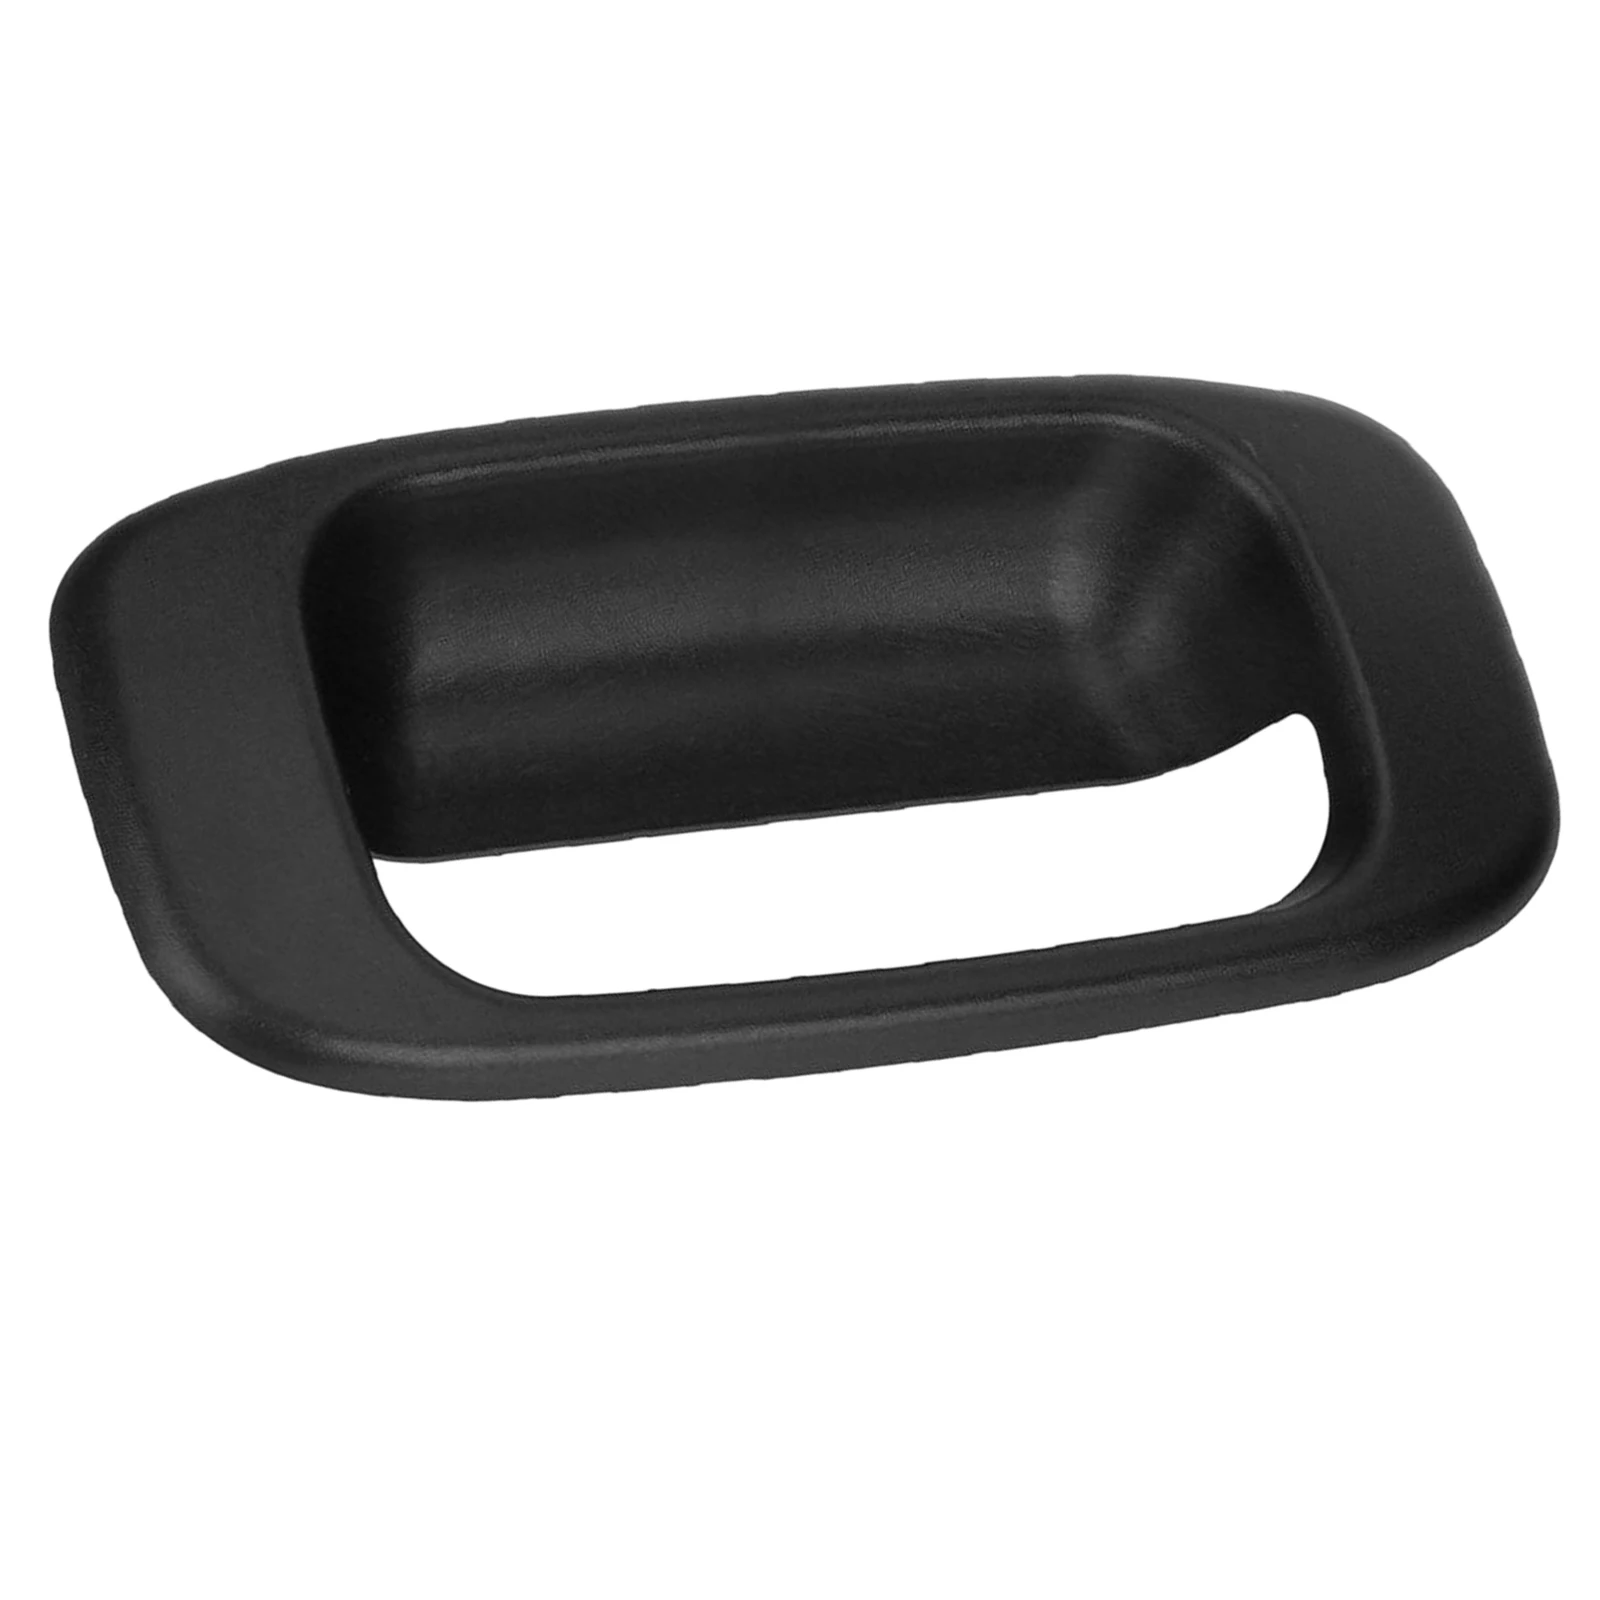 Car Tail Gate Handle Bezel Replacement Parts Fit for Chevrolet Silverado 1500 HD Classic 2007